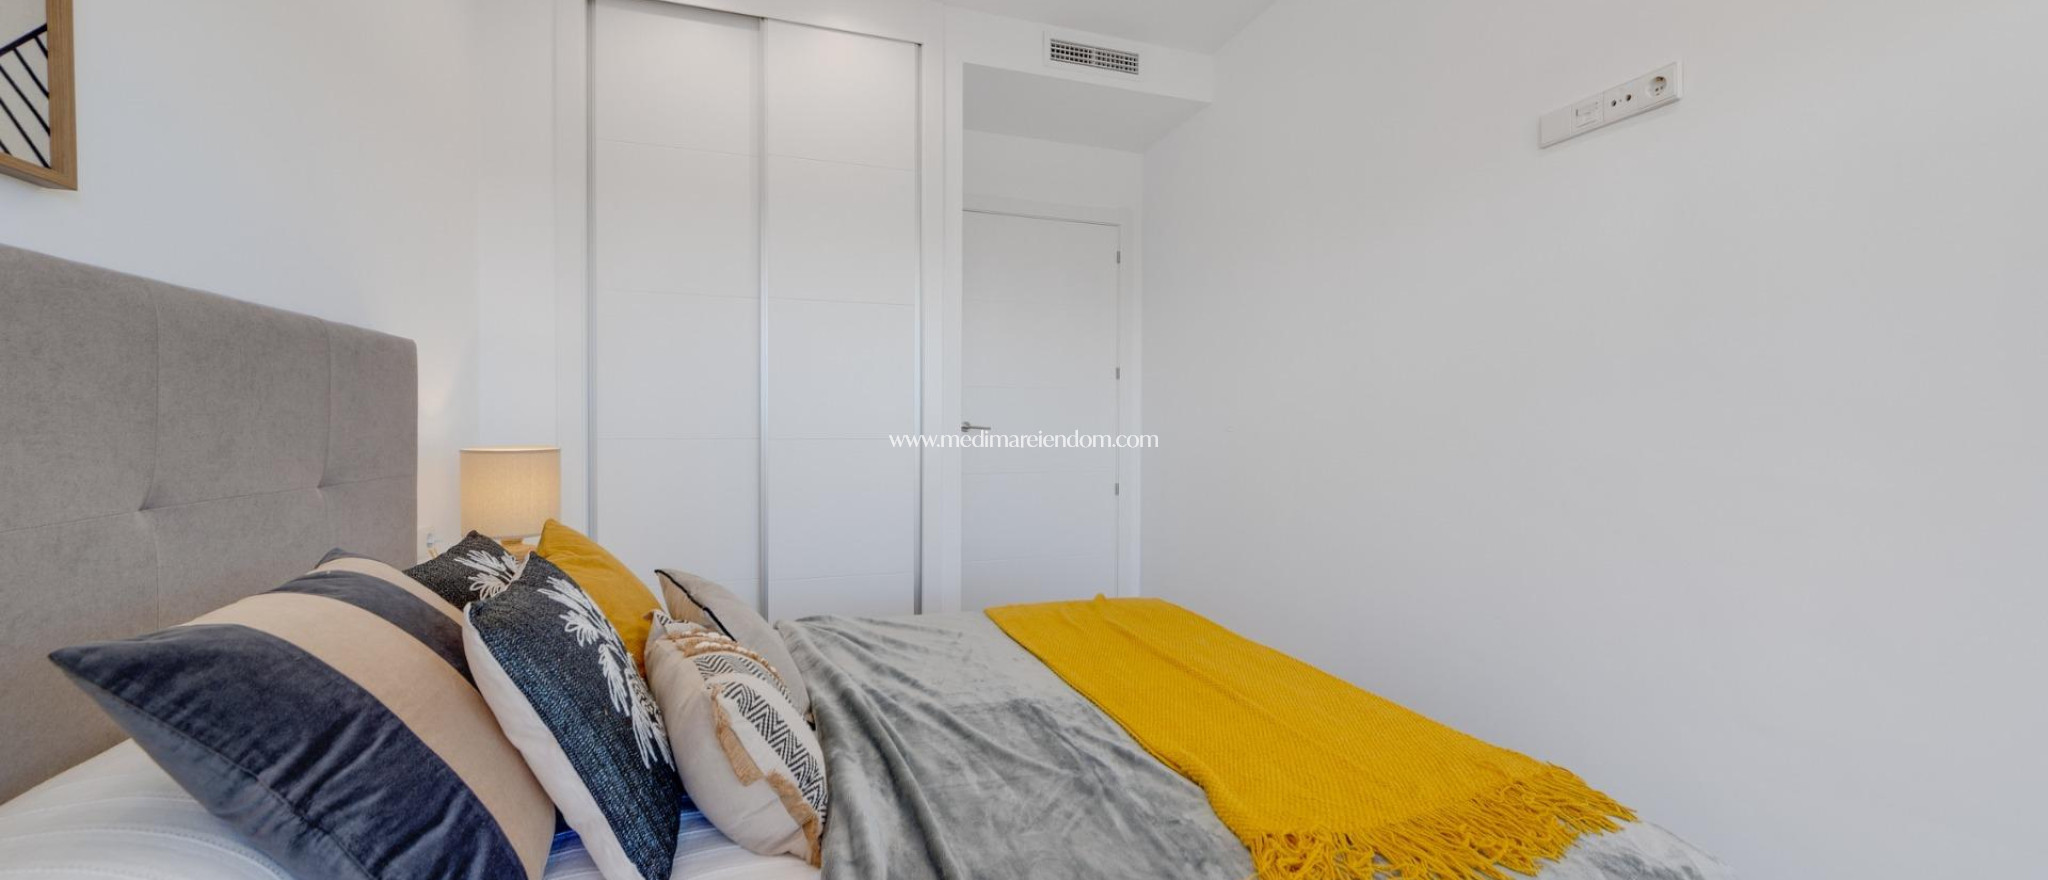 Nybygg - Penthouse - Arenales del Sol